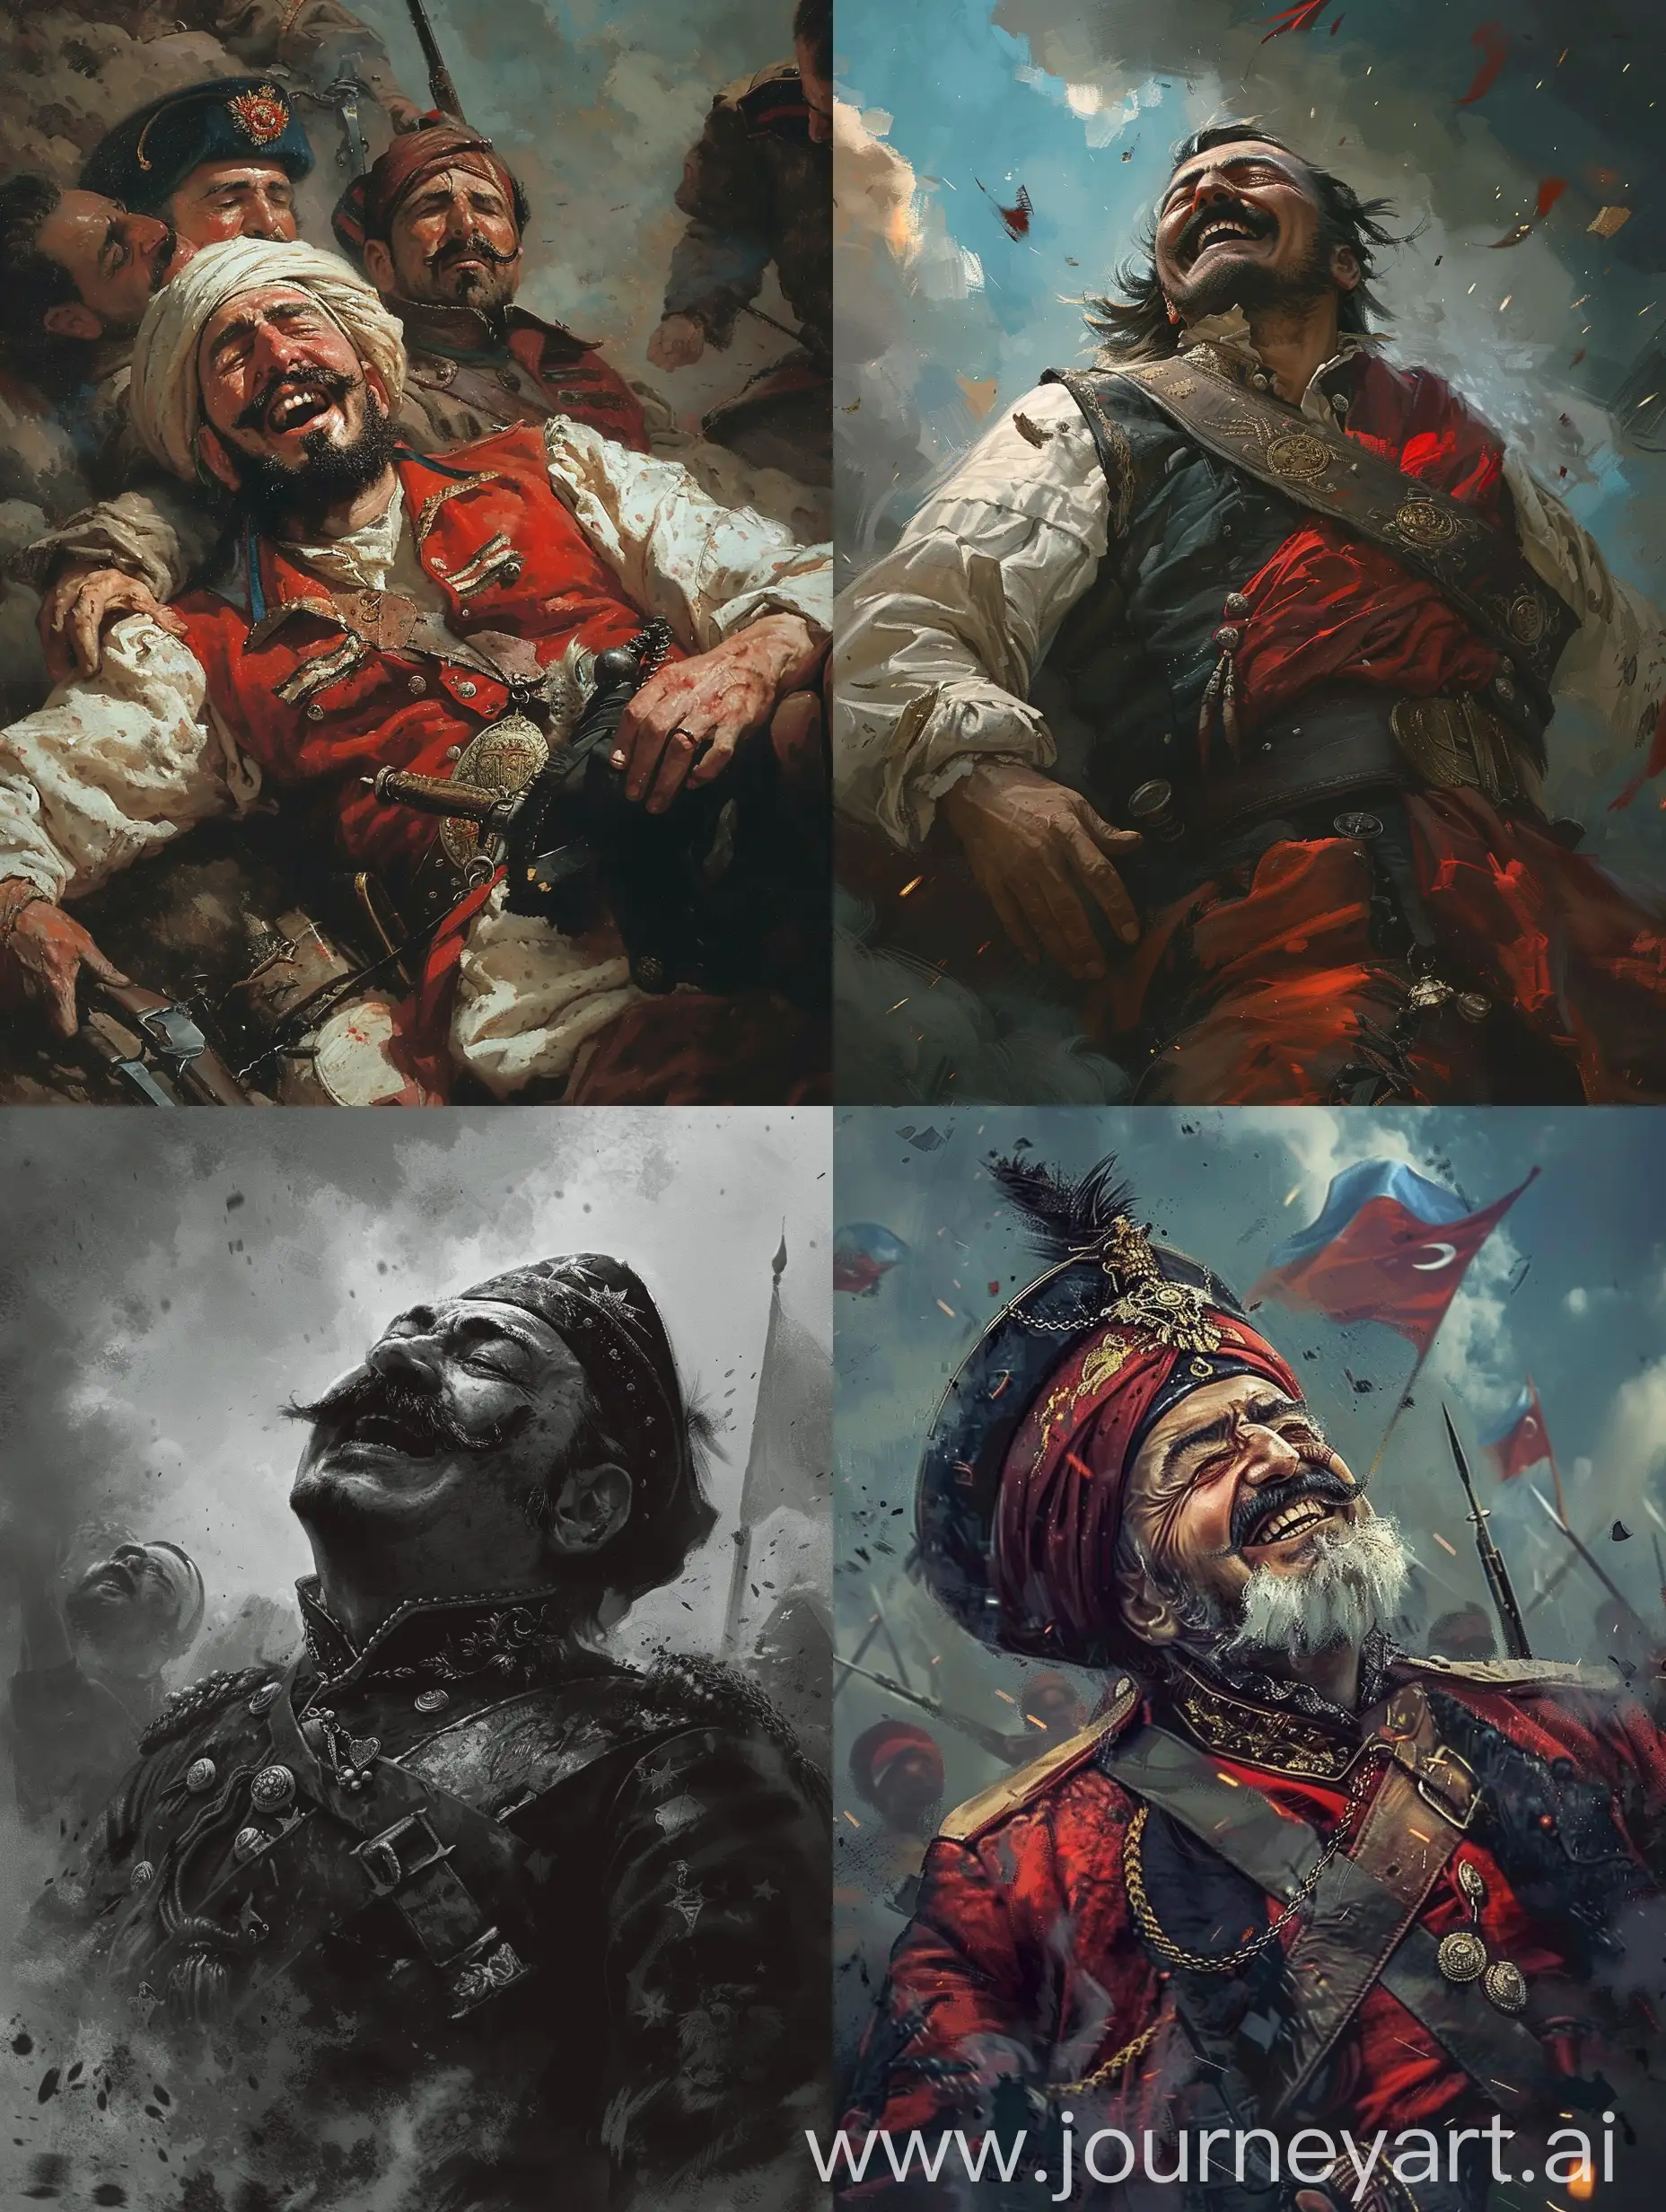 Enver Pasha collapses as he fights his last battle against the Russians and smiles looking up at the sky. His soul is now free, his beloved Naciye Sultan flashes before his eyes, he remembers Cemâl Pasha, Talat Pasha and Mustafa Kemâl Pasha from the Period of the Three Pashas. These are his last moments, even if he is going to die, he is not looking back. After all, even if one Enver dies, a thousand Envers will be reborn...